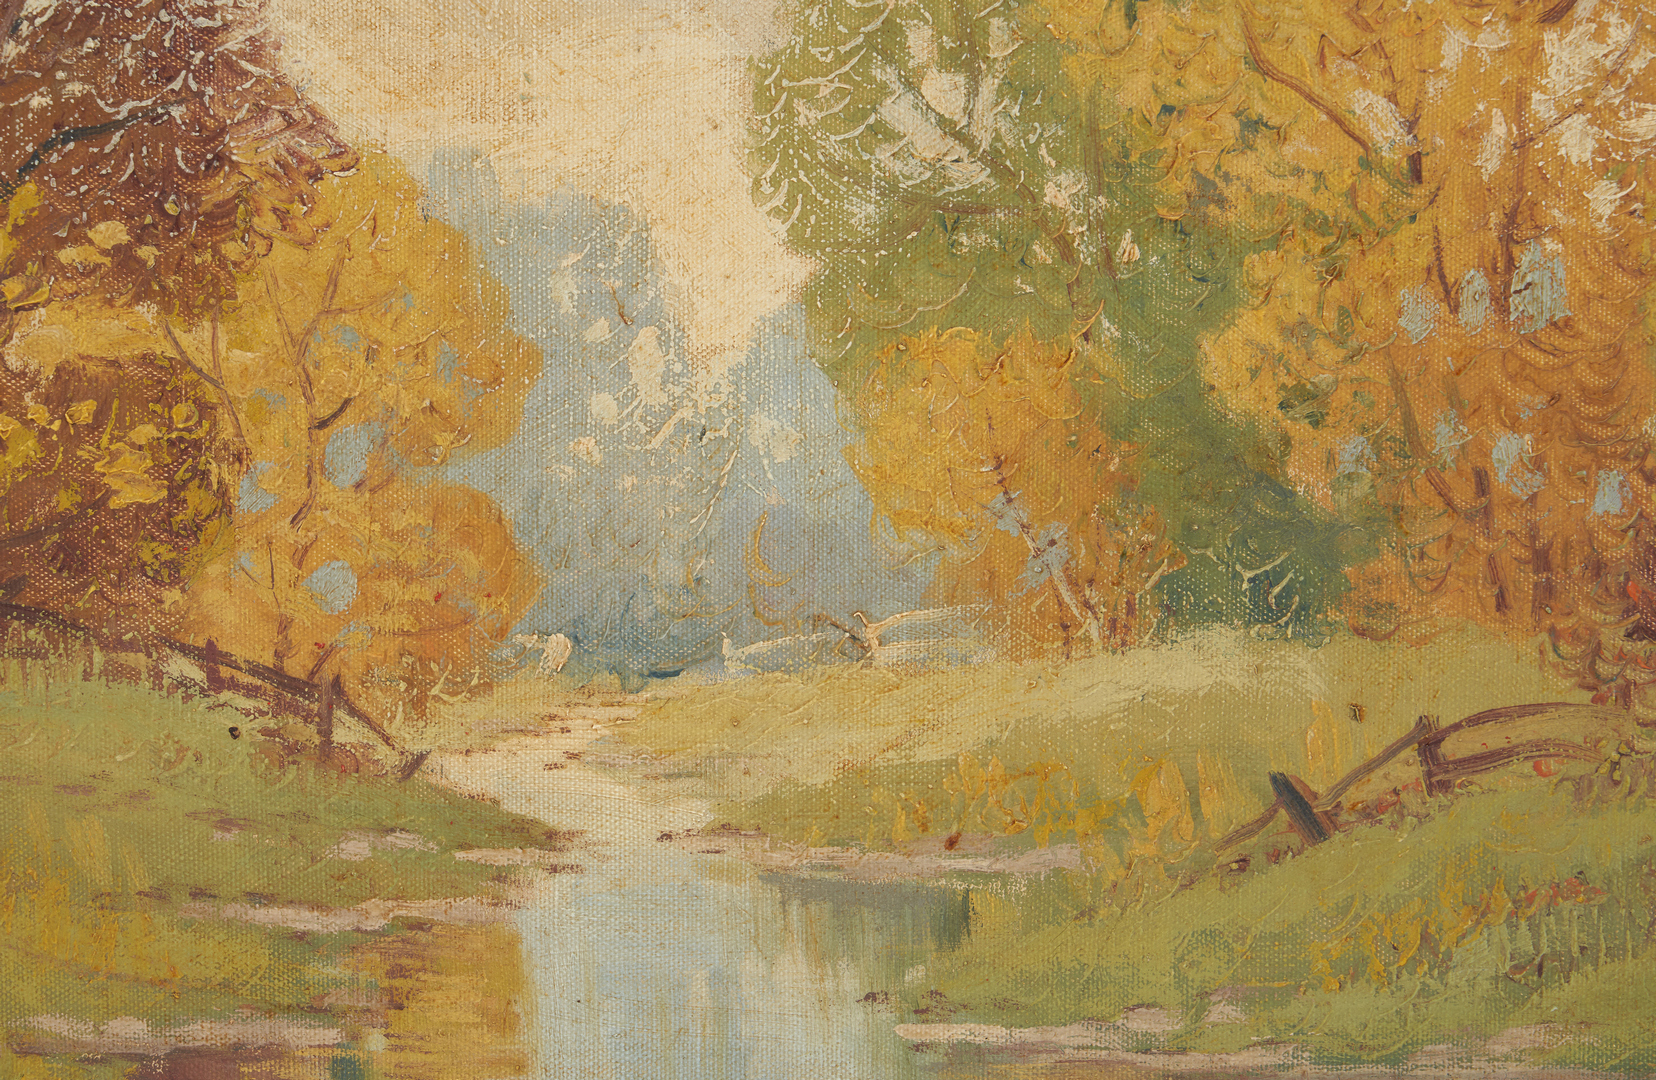 Lot 206: Ernest Fredericks O/C Landscape Painting, Early Autumn Stream